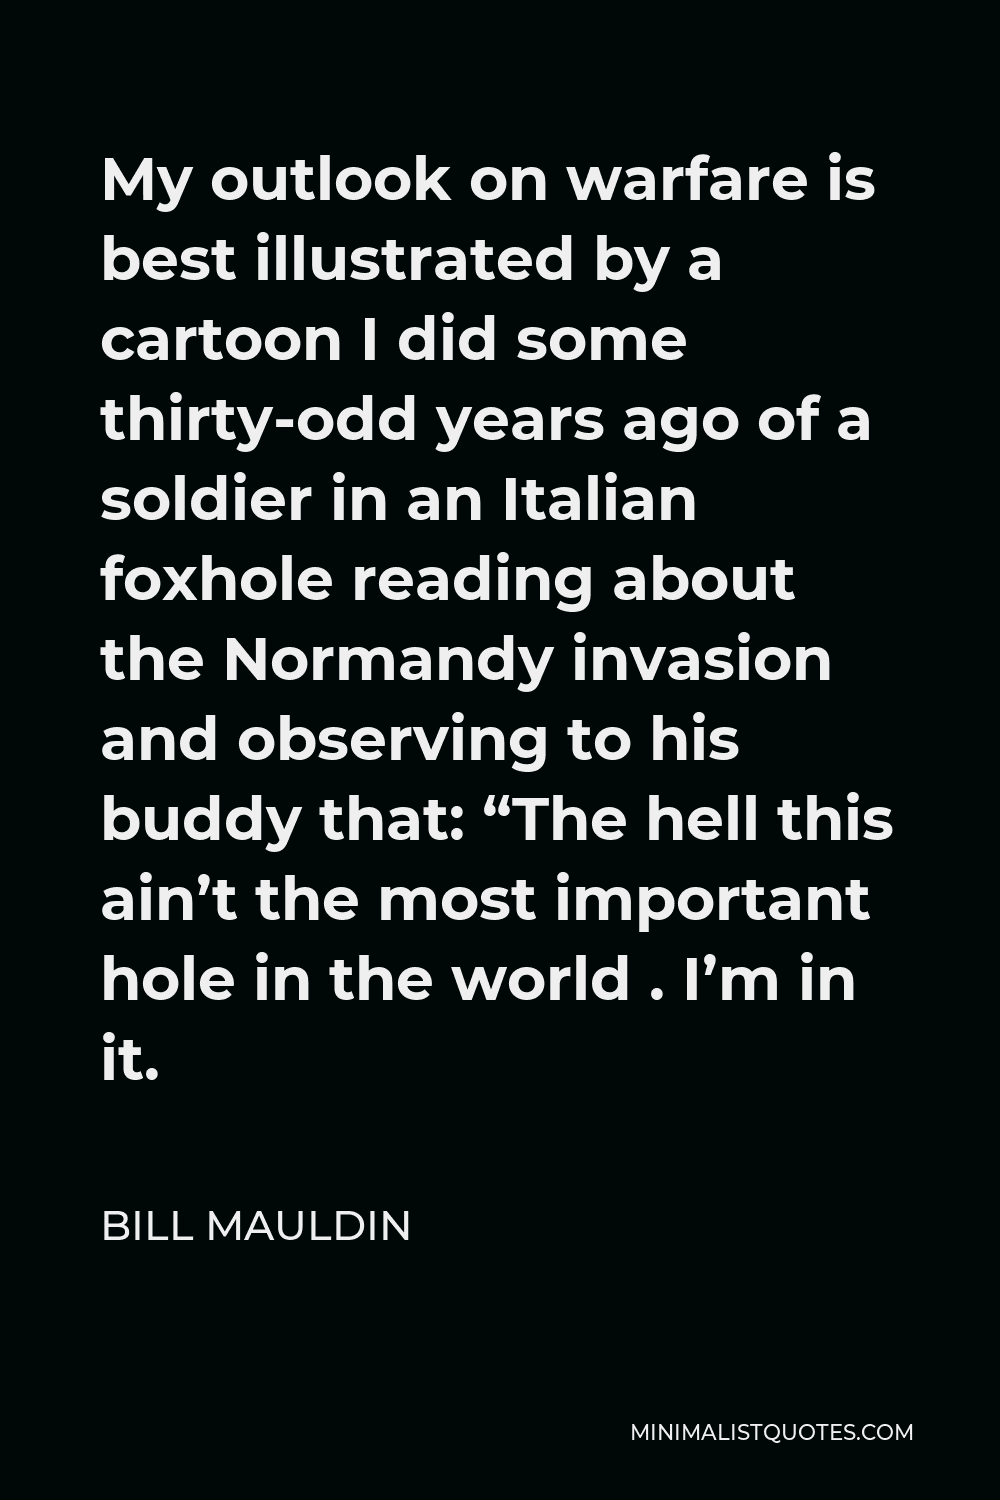 Bill Mauldin Quote - My outlook on warfare is best illustrated by a cartoon I did some thirty-odd years ago of a soldier in an Italian foxhole reading about the Normandy invasion and observing to his buddy that: “The hell this ain’t the most important hole in the world . I’m in it.